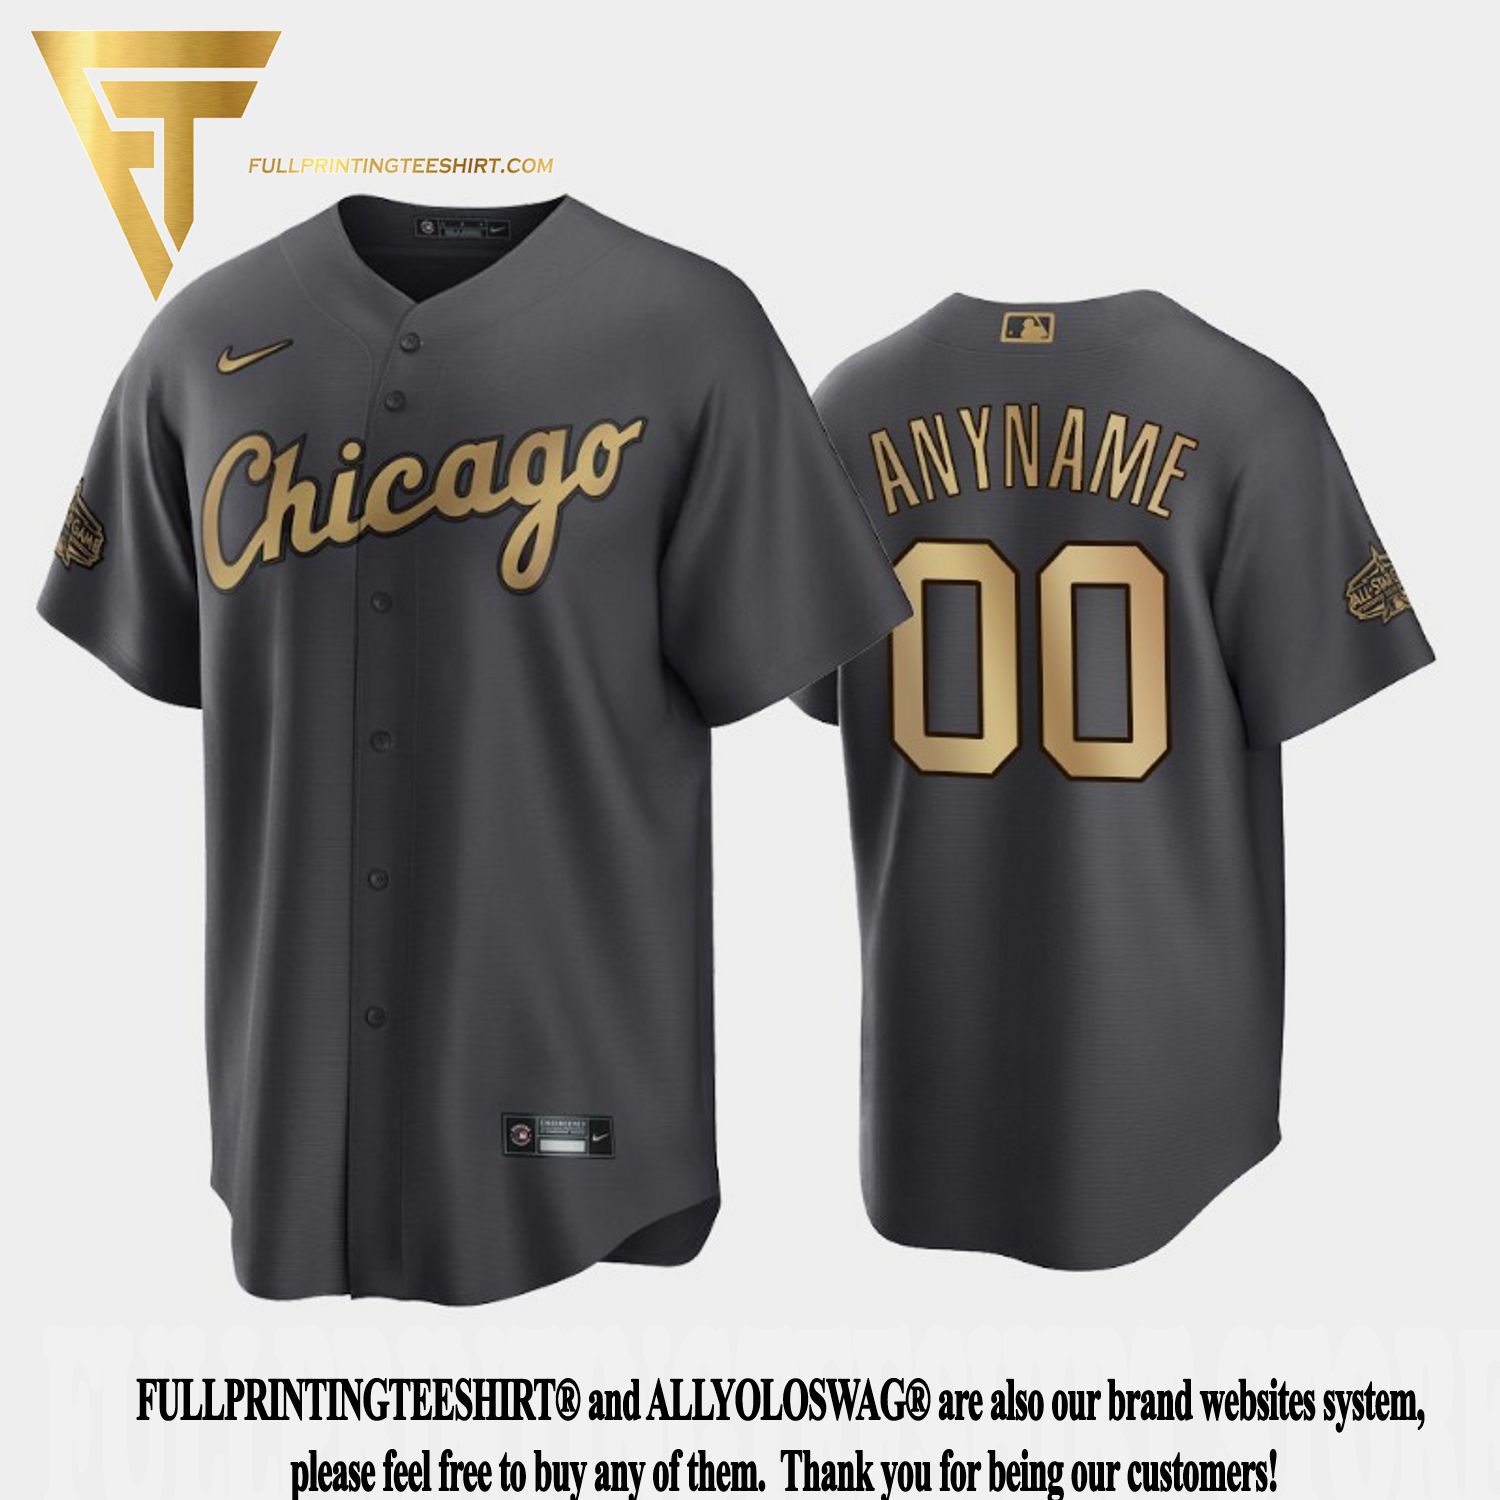 white sox all star jersey